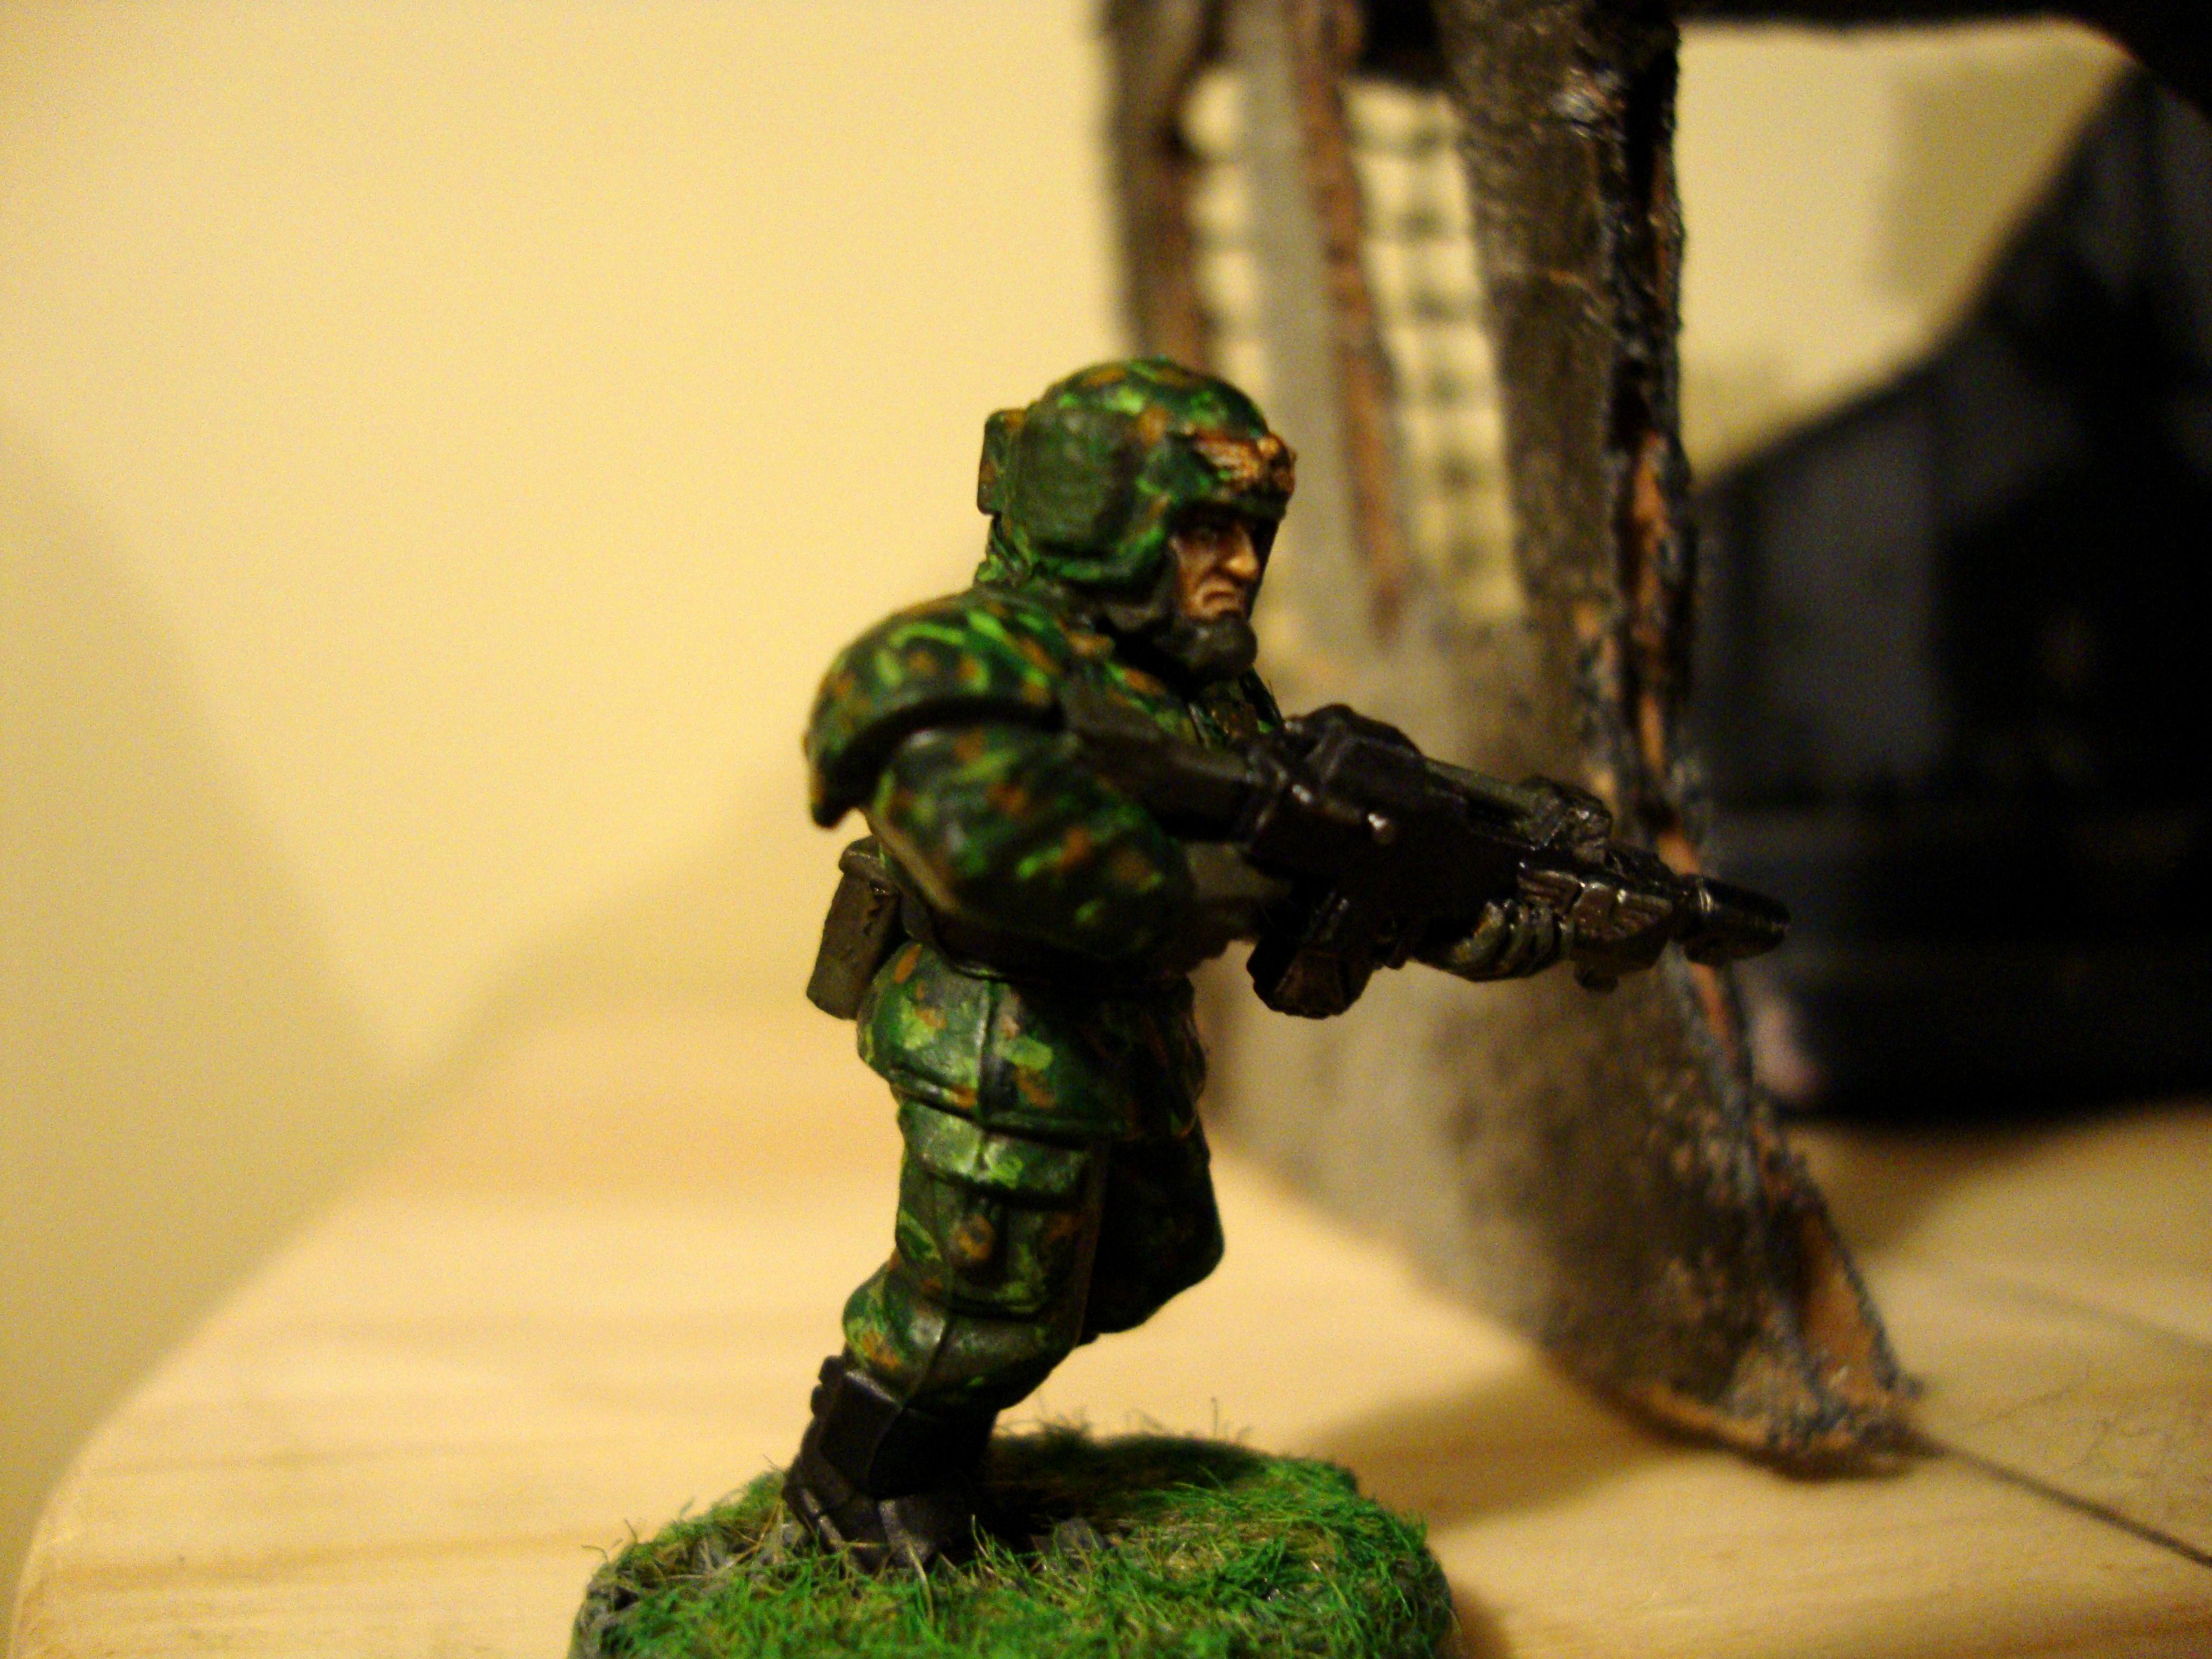 Cadians, Cadpat, Camouflage, Canada, Canadian, Imperial Guard